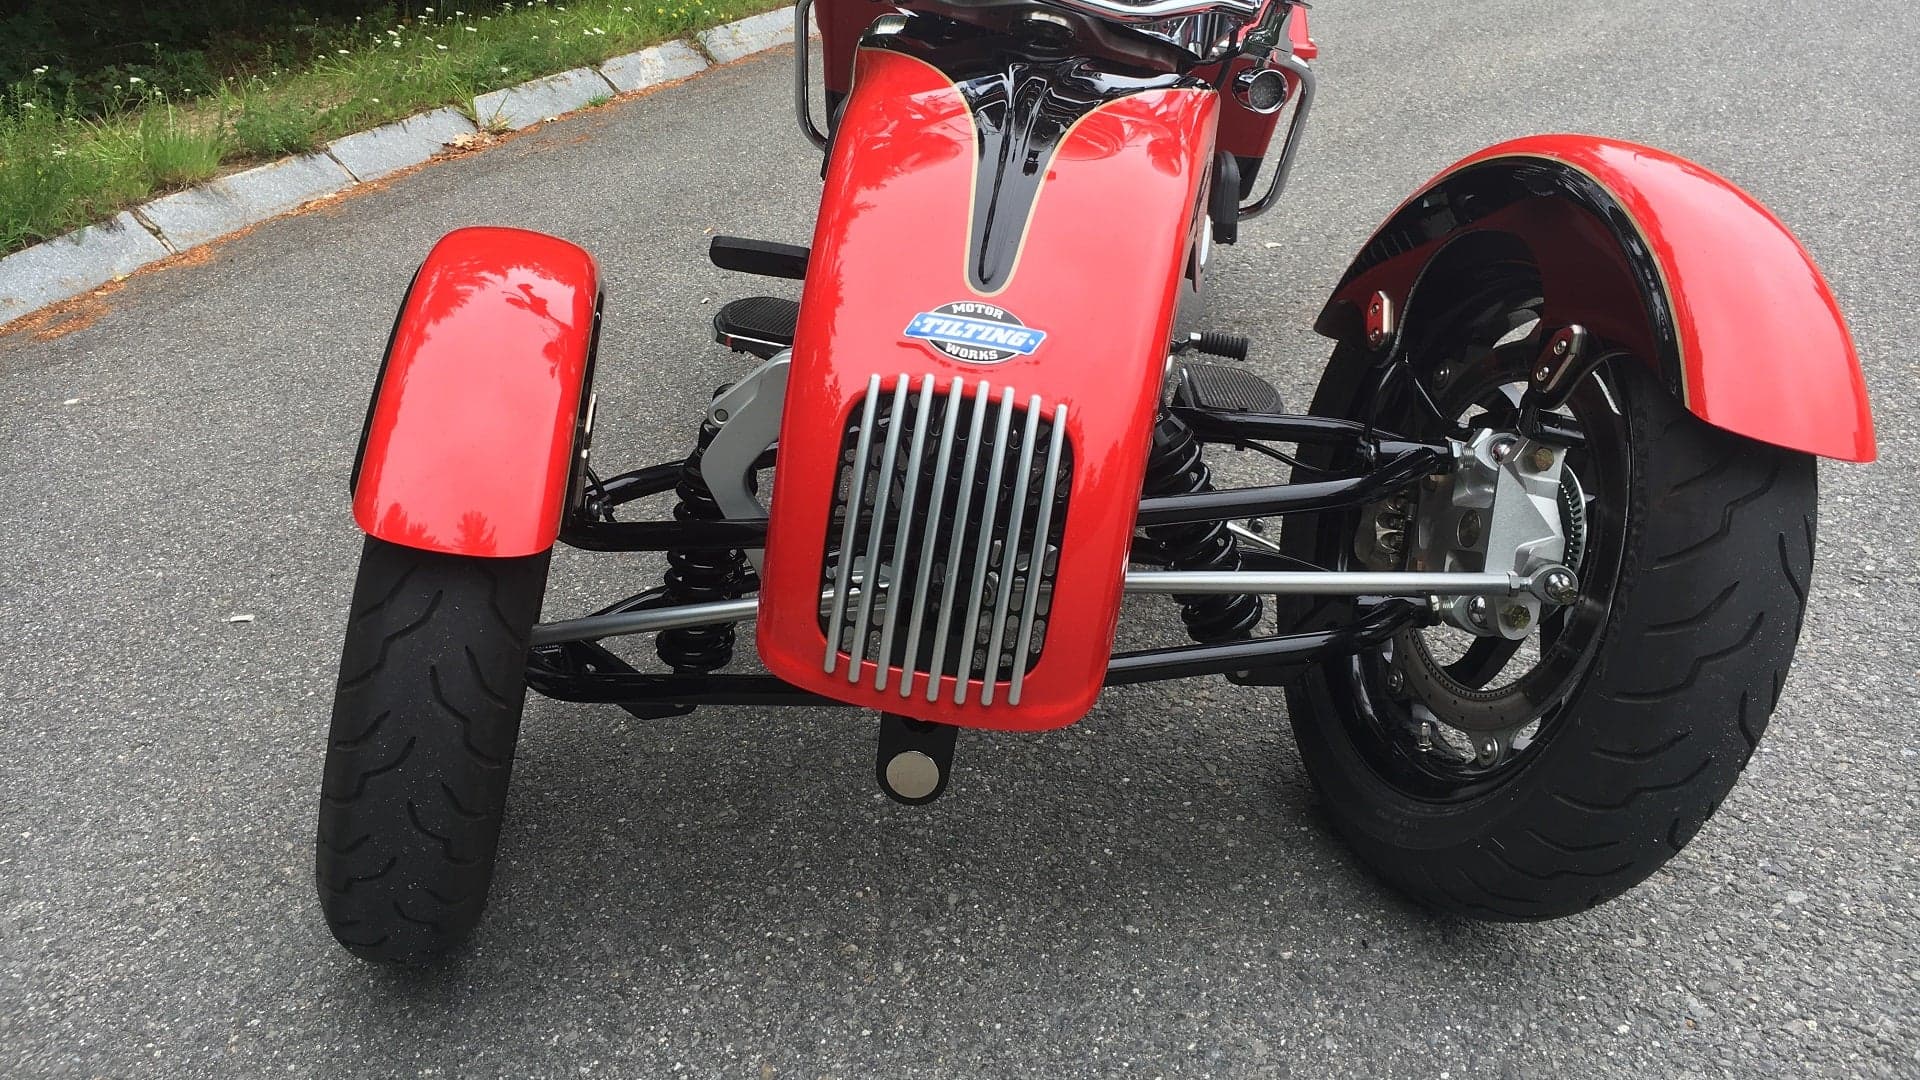 This Kit From Tilting Motor Works Makes 3 Wheels on a Motorcycle Feel Like 2